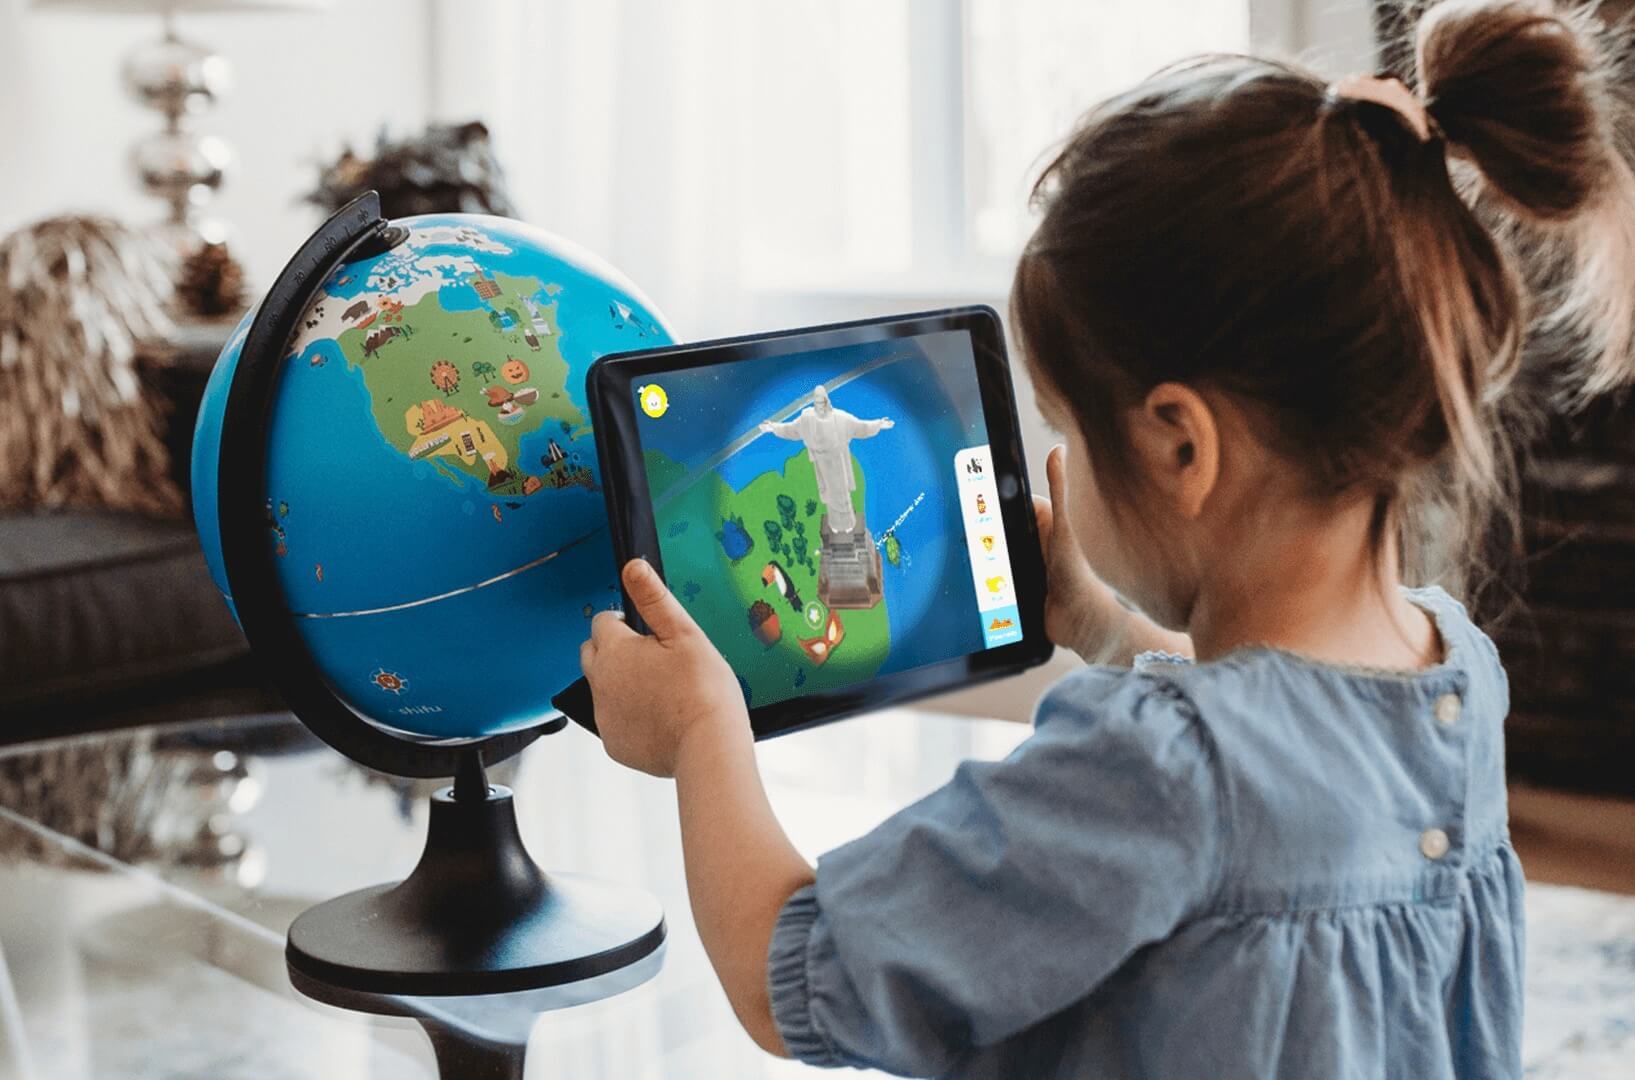 Toymakers Industry: Amalgamation of Education with Virtual Play